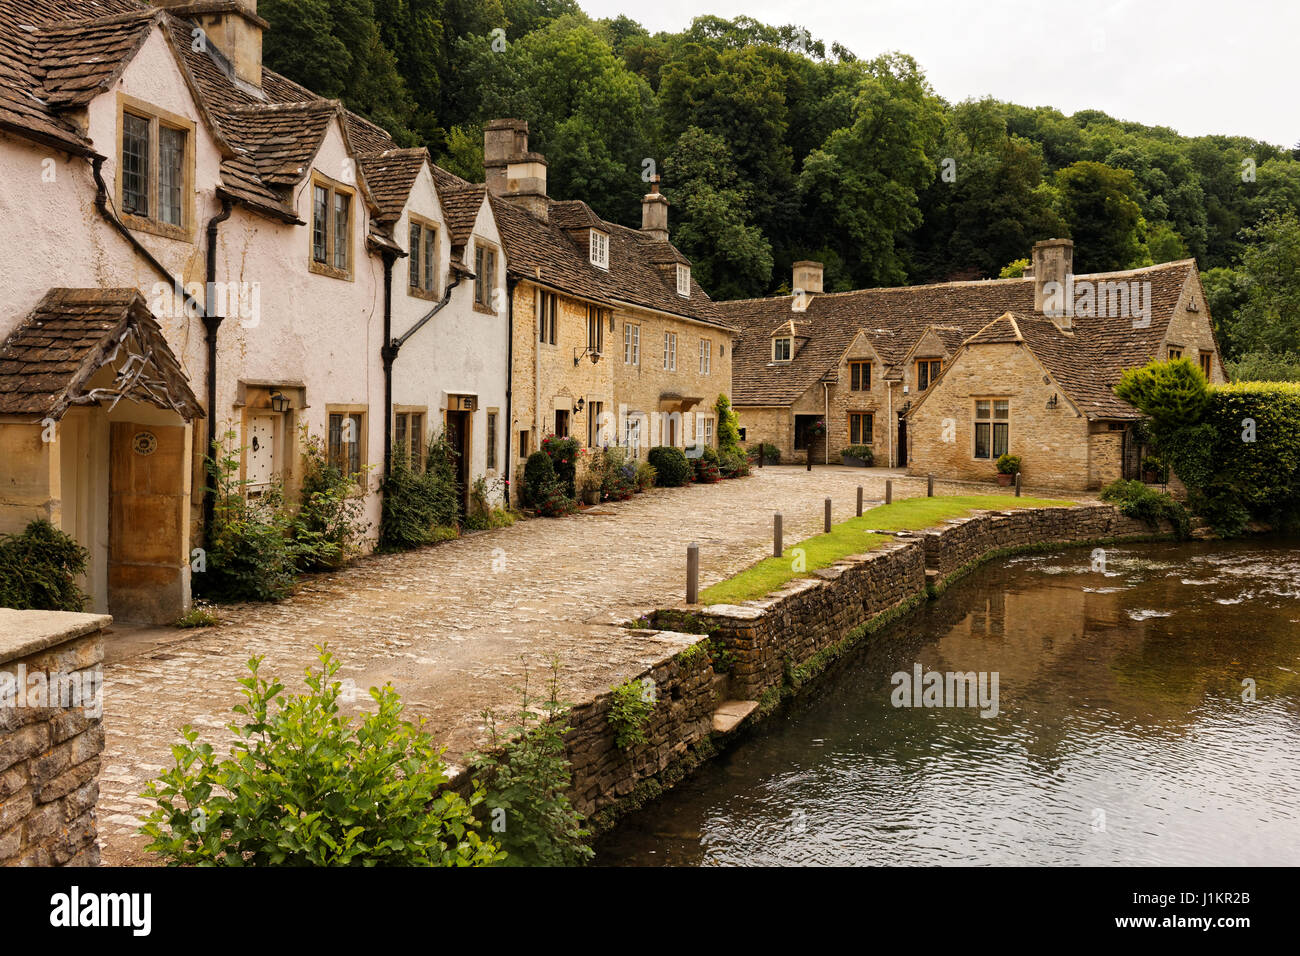 Main street in Castle Combe, Wiltshire, England, UK Stock Photo